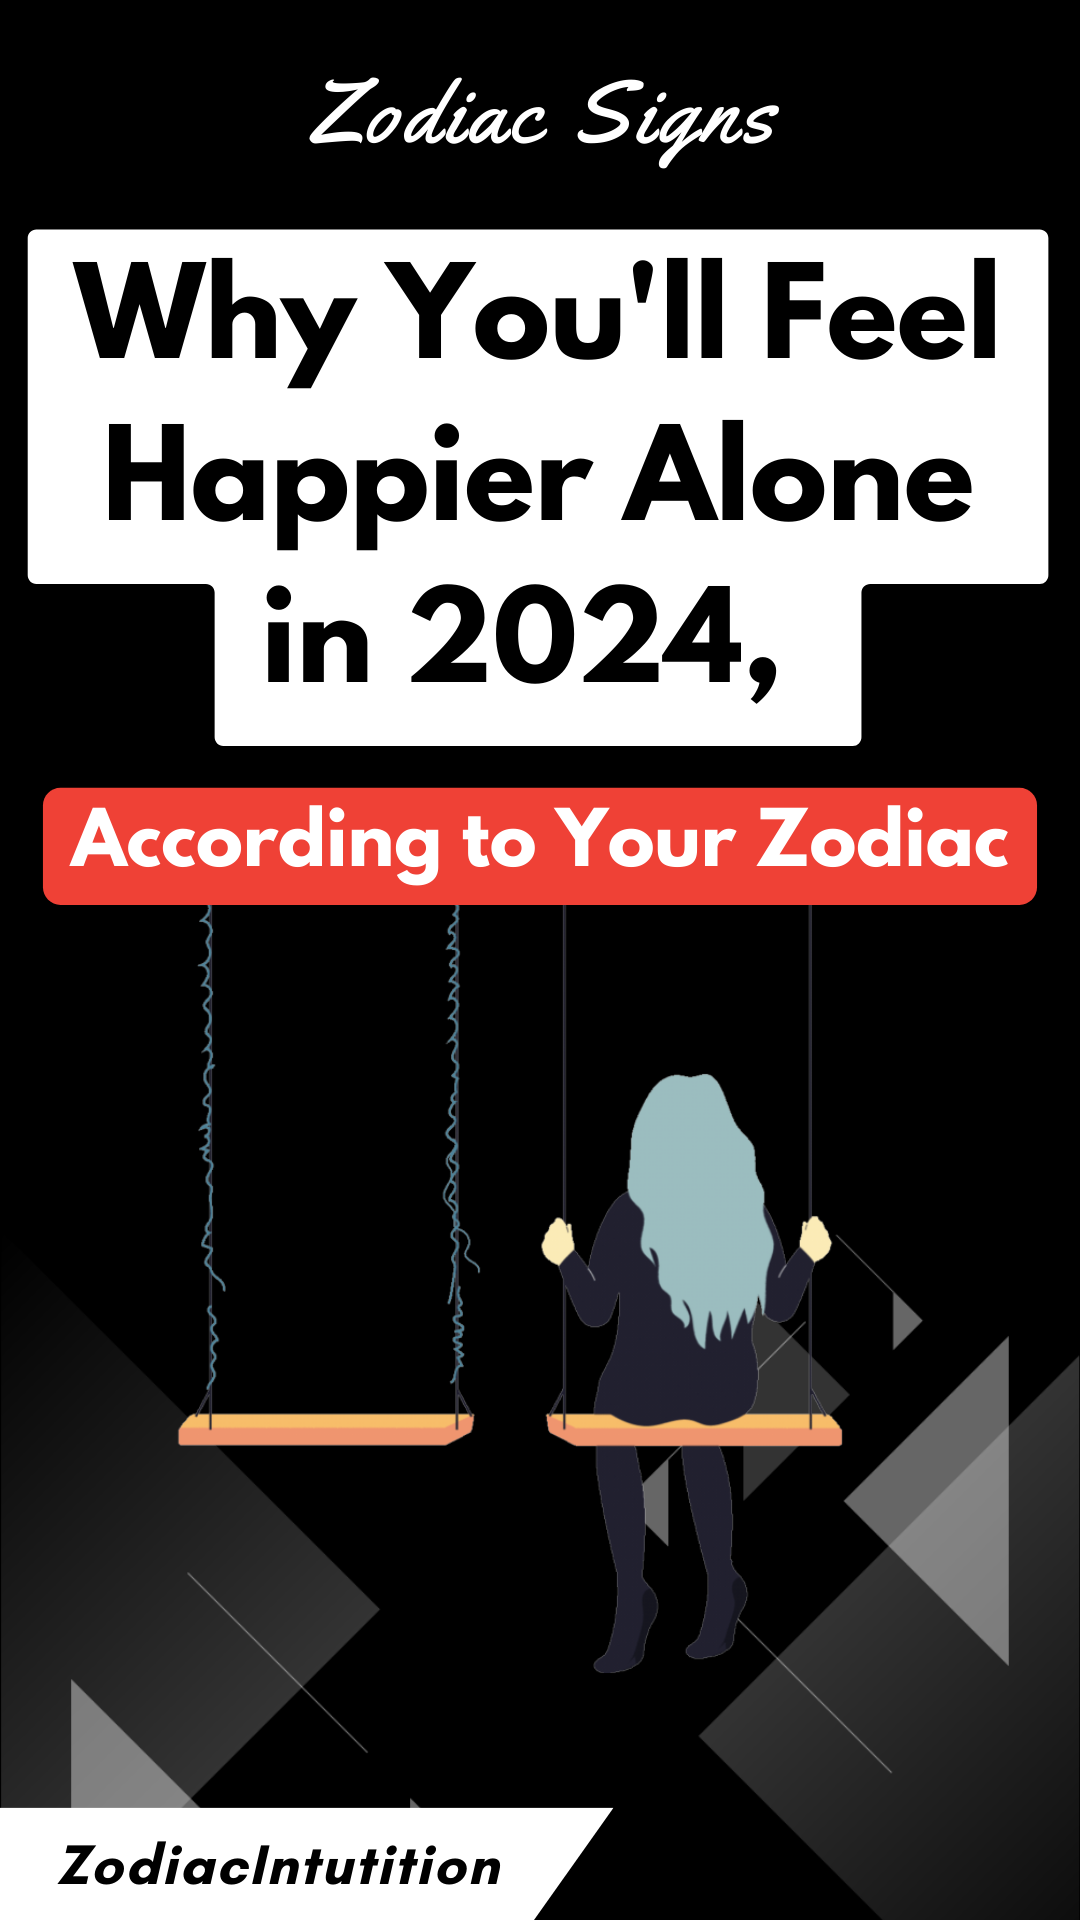 Why You'll Feel Happier Alone in 2024, According to Your Zodiac